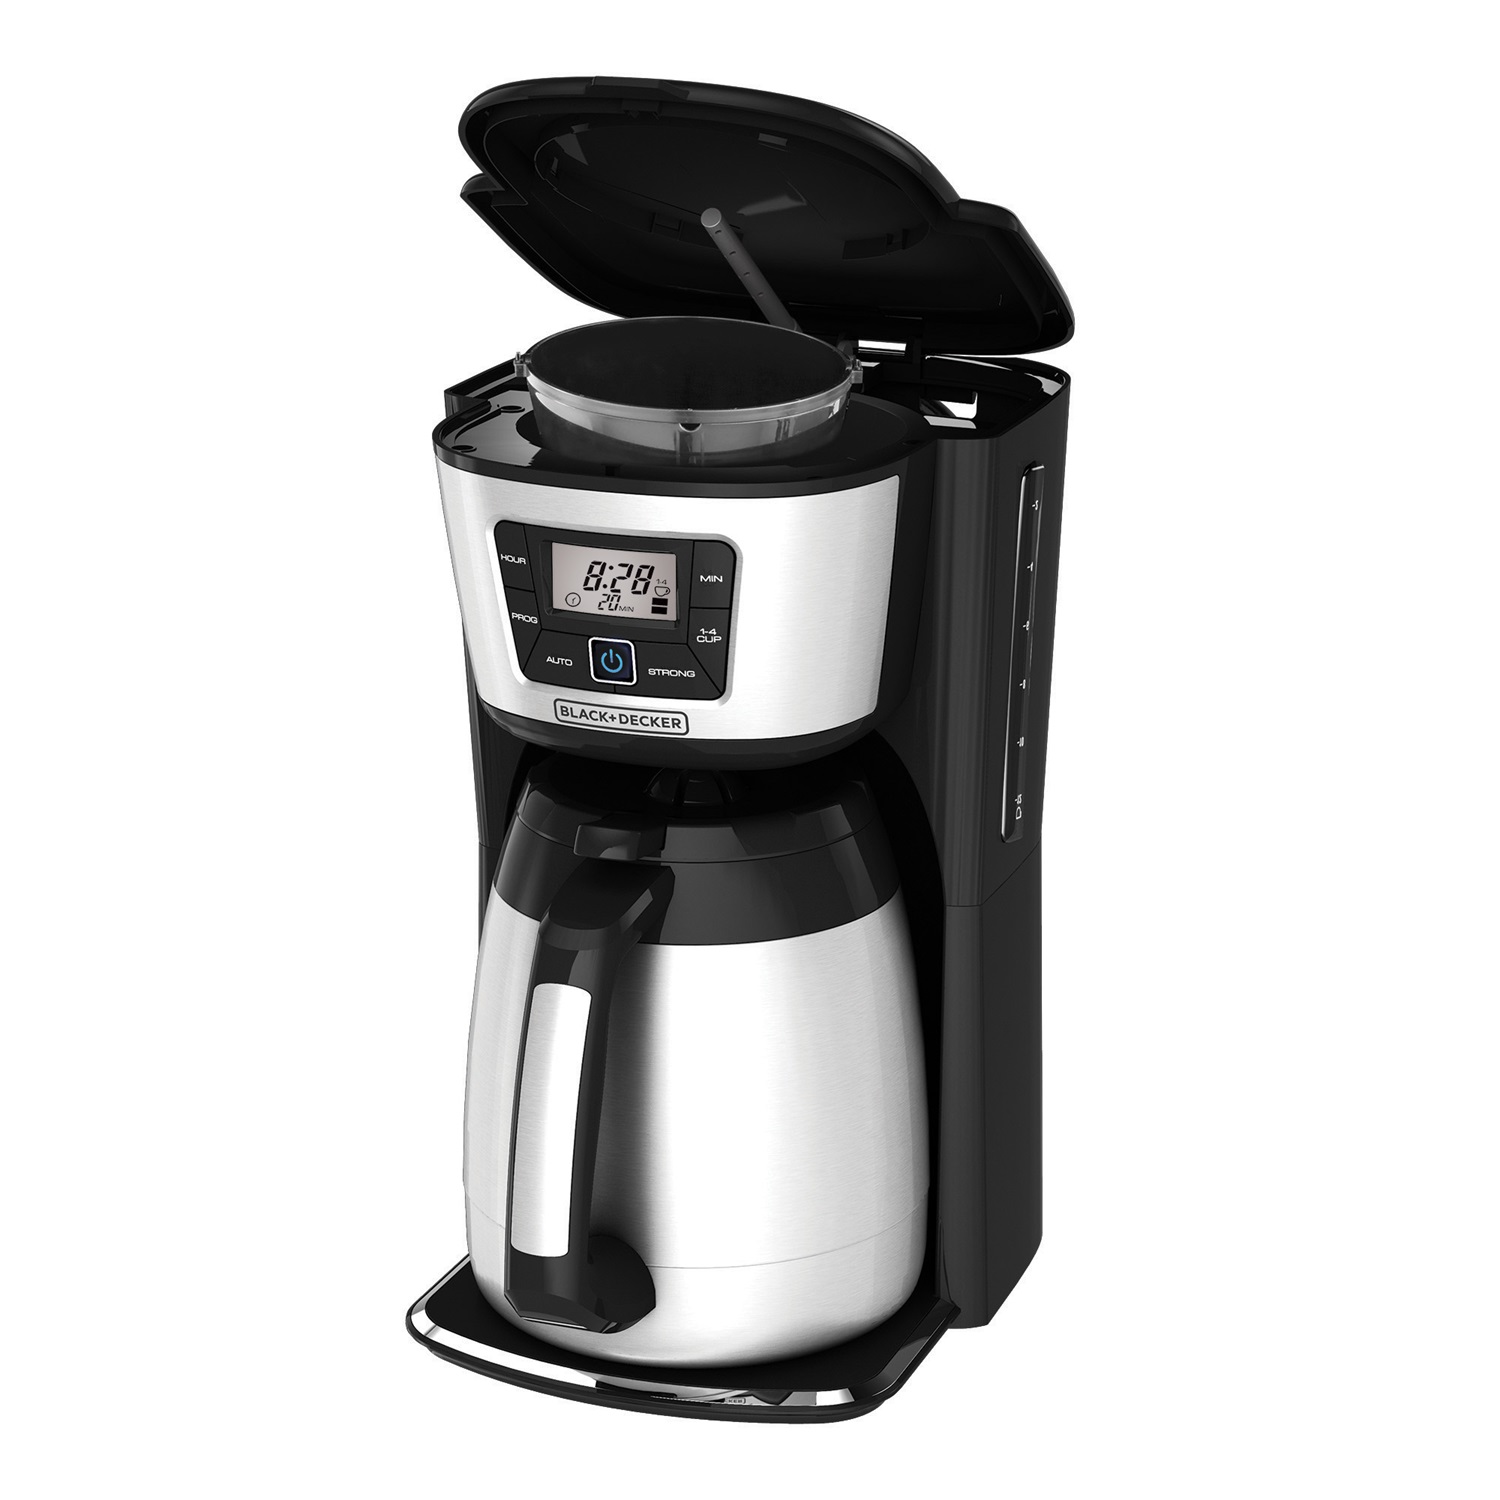 https://www.wideopencountry.com/wp-content/uploads/sites/4/eats/2021/04/BLACKDECKER-12-Cup-Programmable-Coffee-Maker-Thermal-Carafe-CM2035B-.jpeg?resize=1500%2C1500